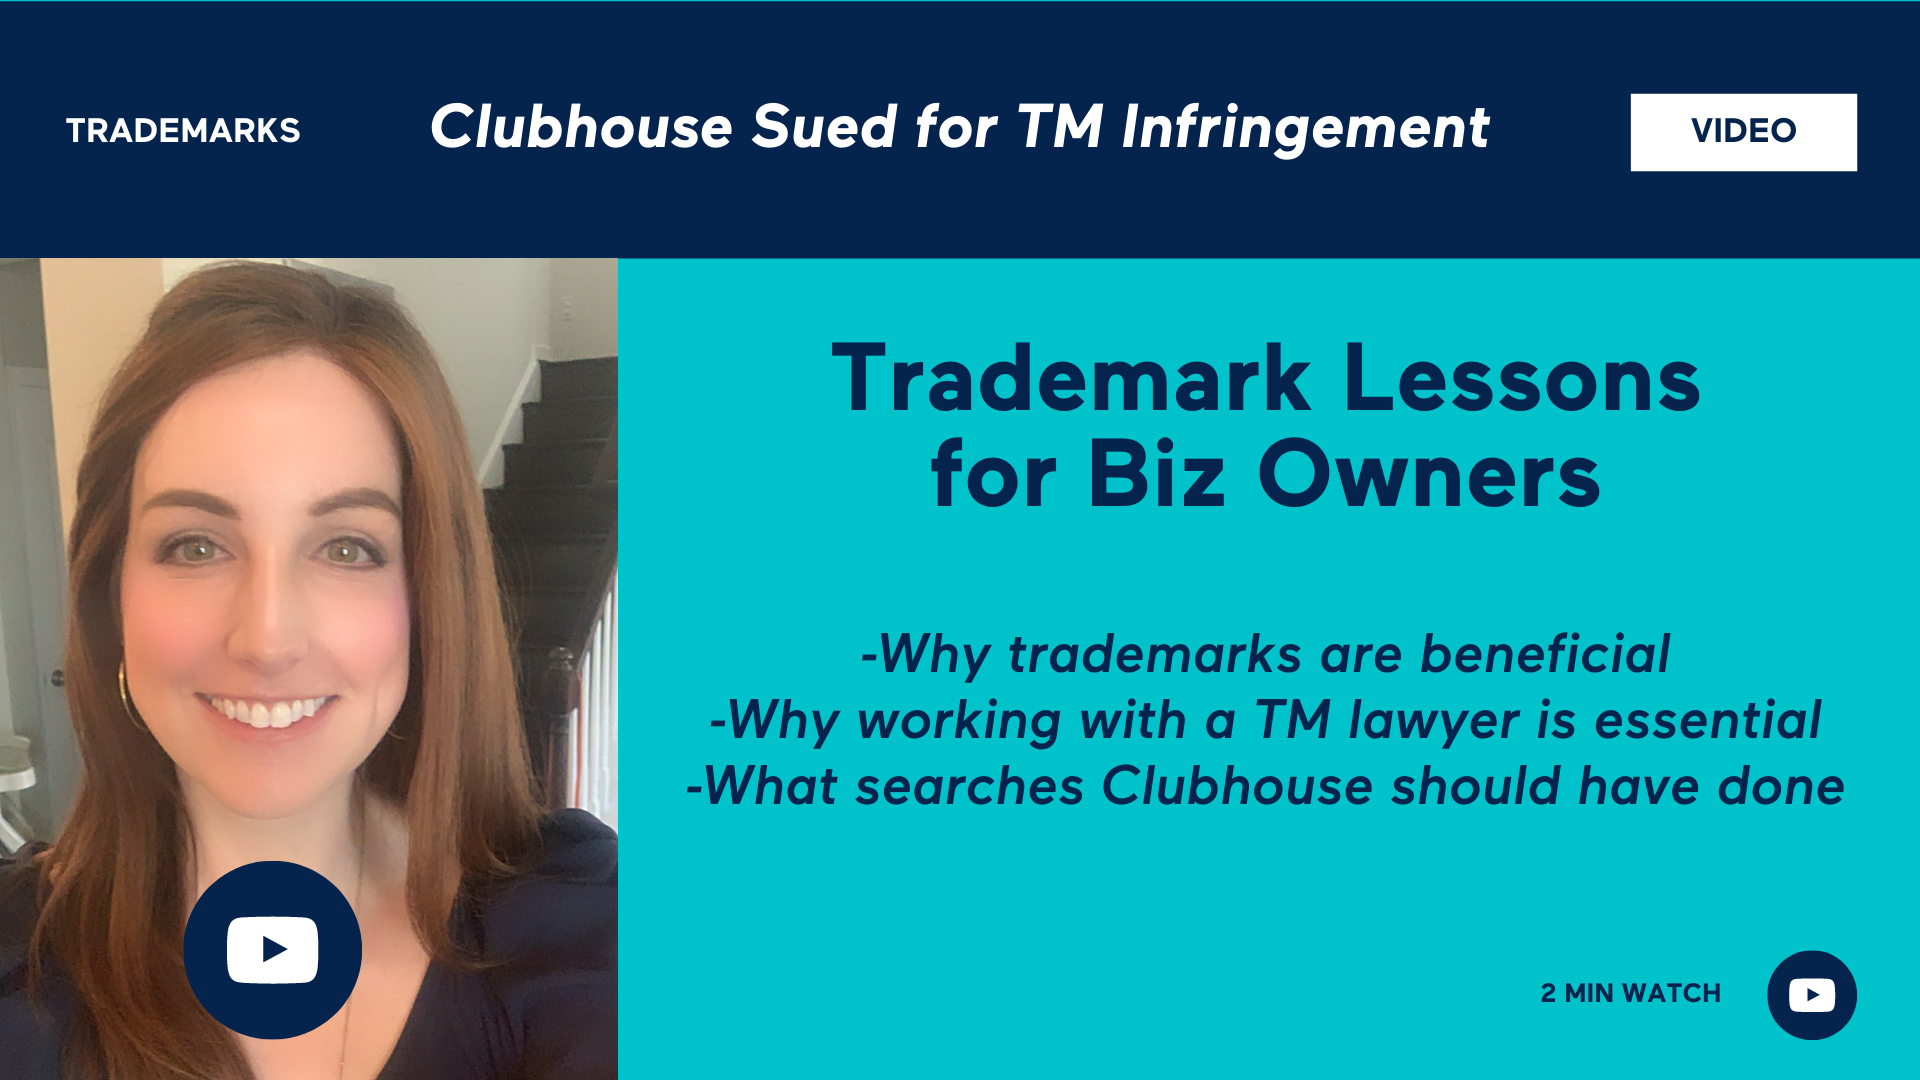 Clubhouse Sued for TM Infringement